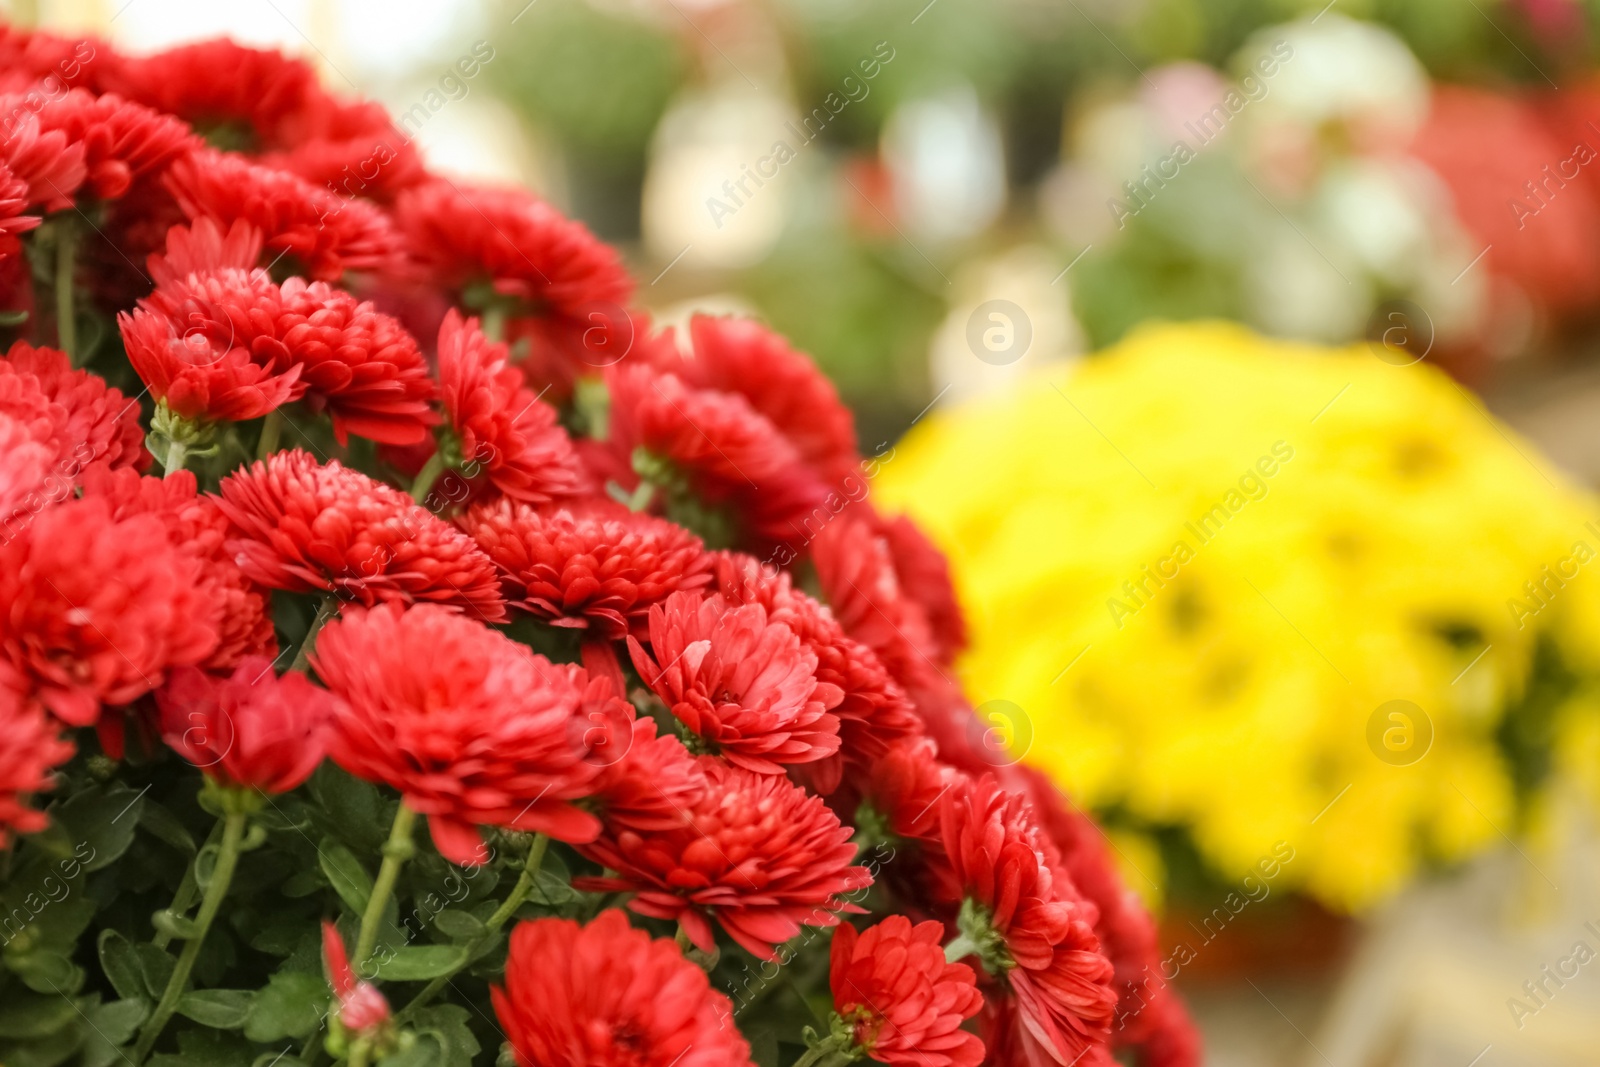 Photo of Beautiful fresh bouquet of colorful chrysanthemum flowers